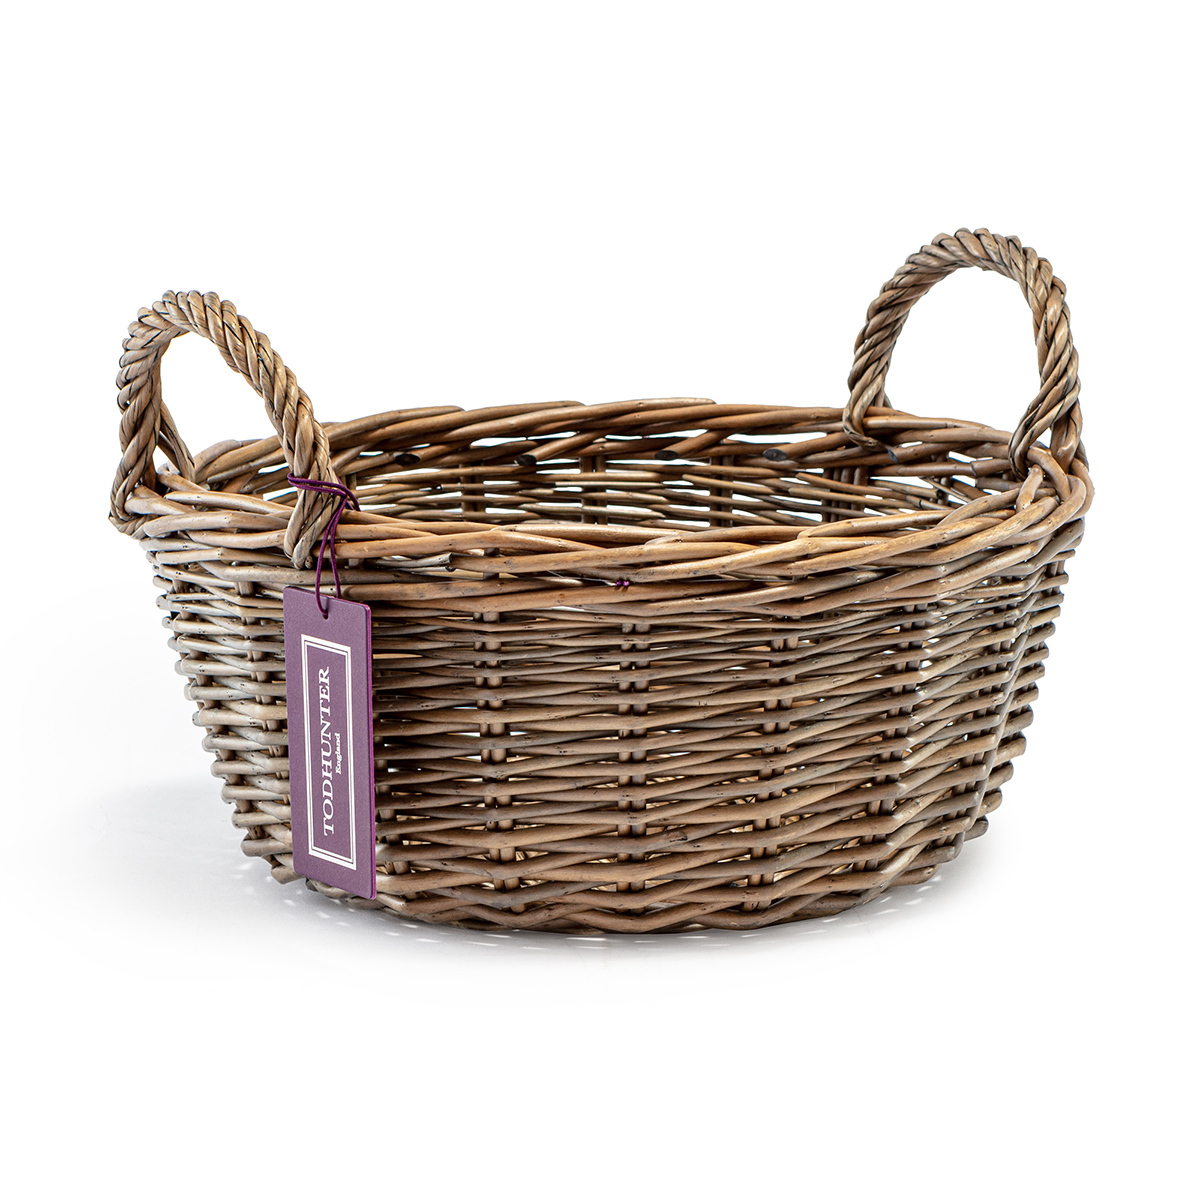 Basket on its own with Todhunter label